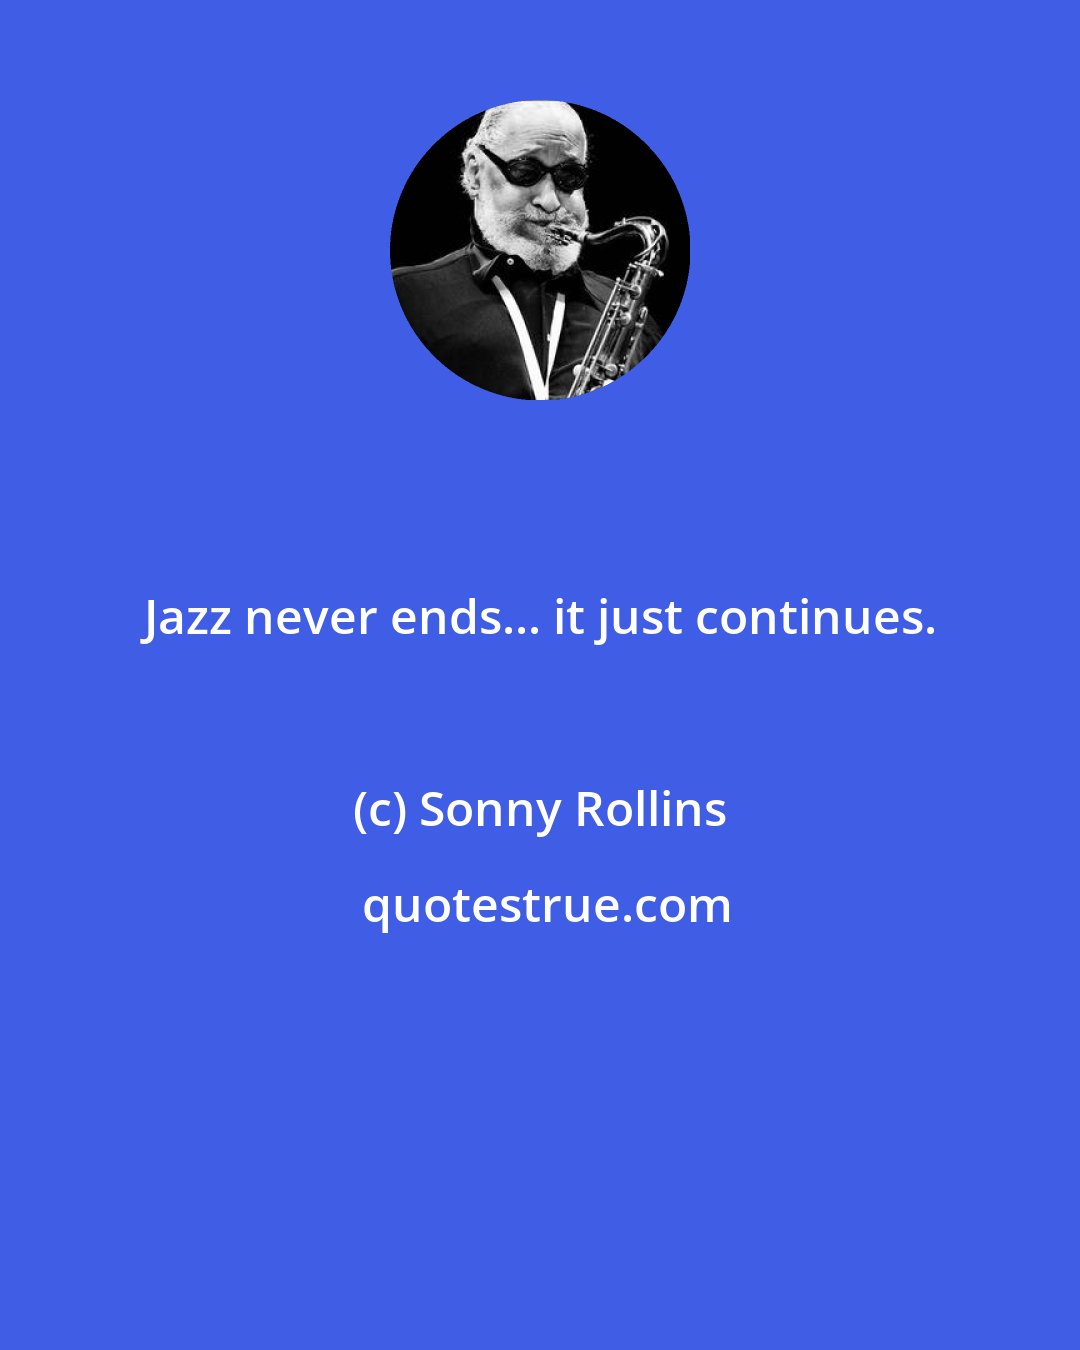 Sonny Rollins: Jazz never ends... it just continues.